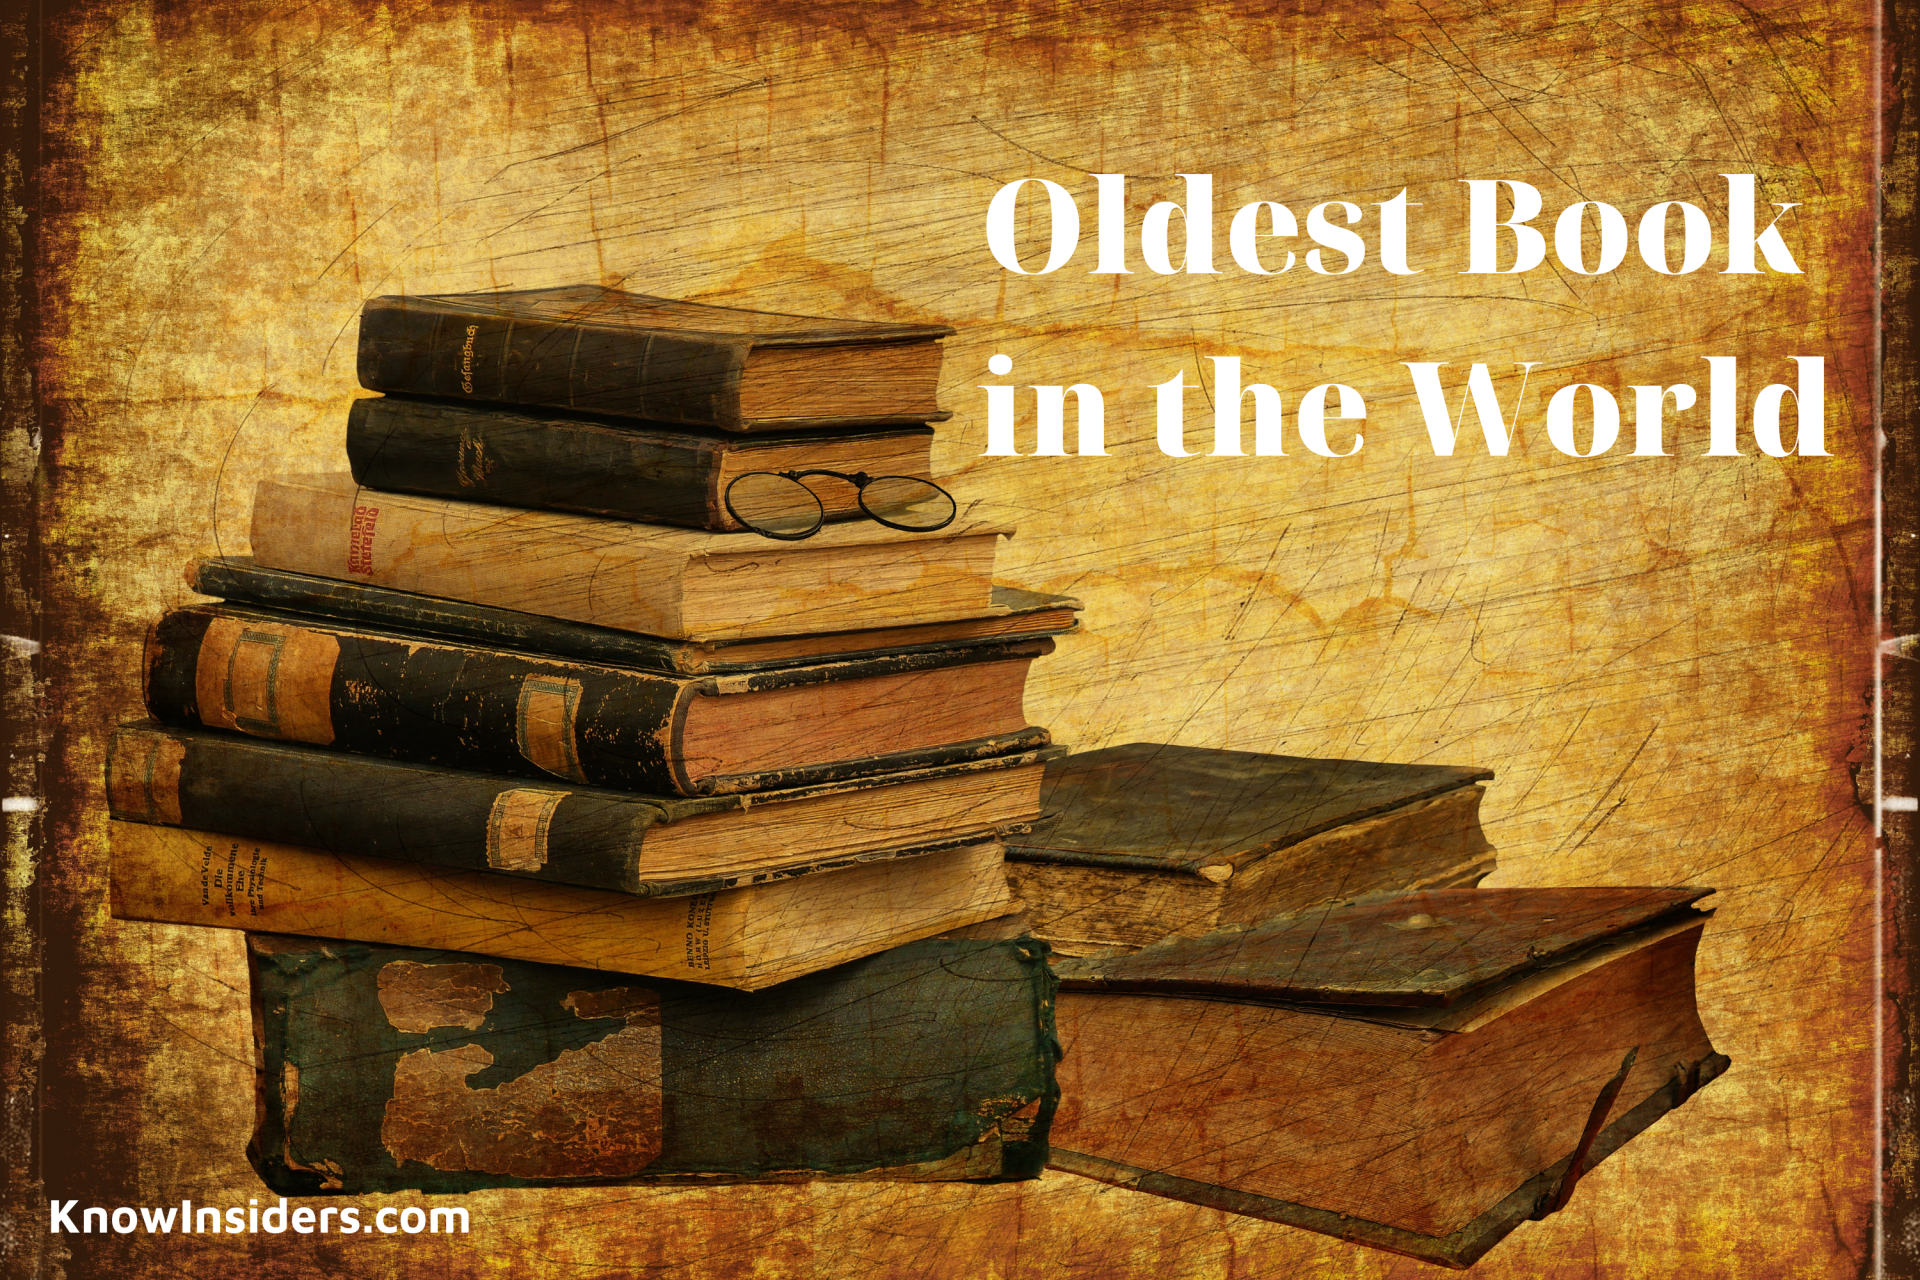 What Is The Oldest Book in the World?